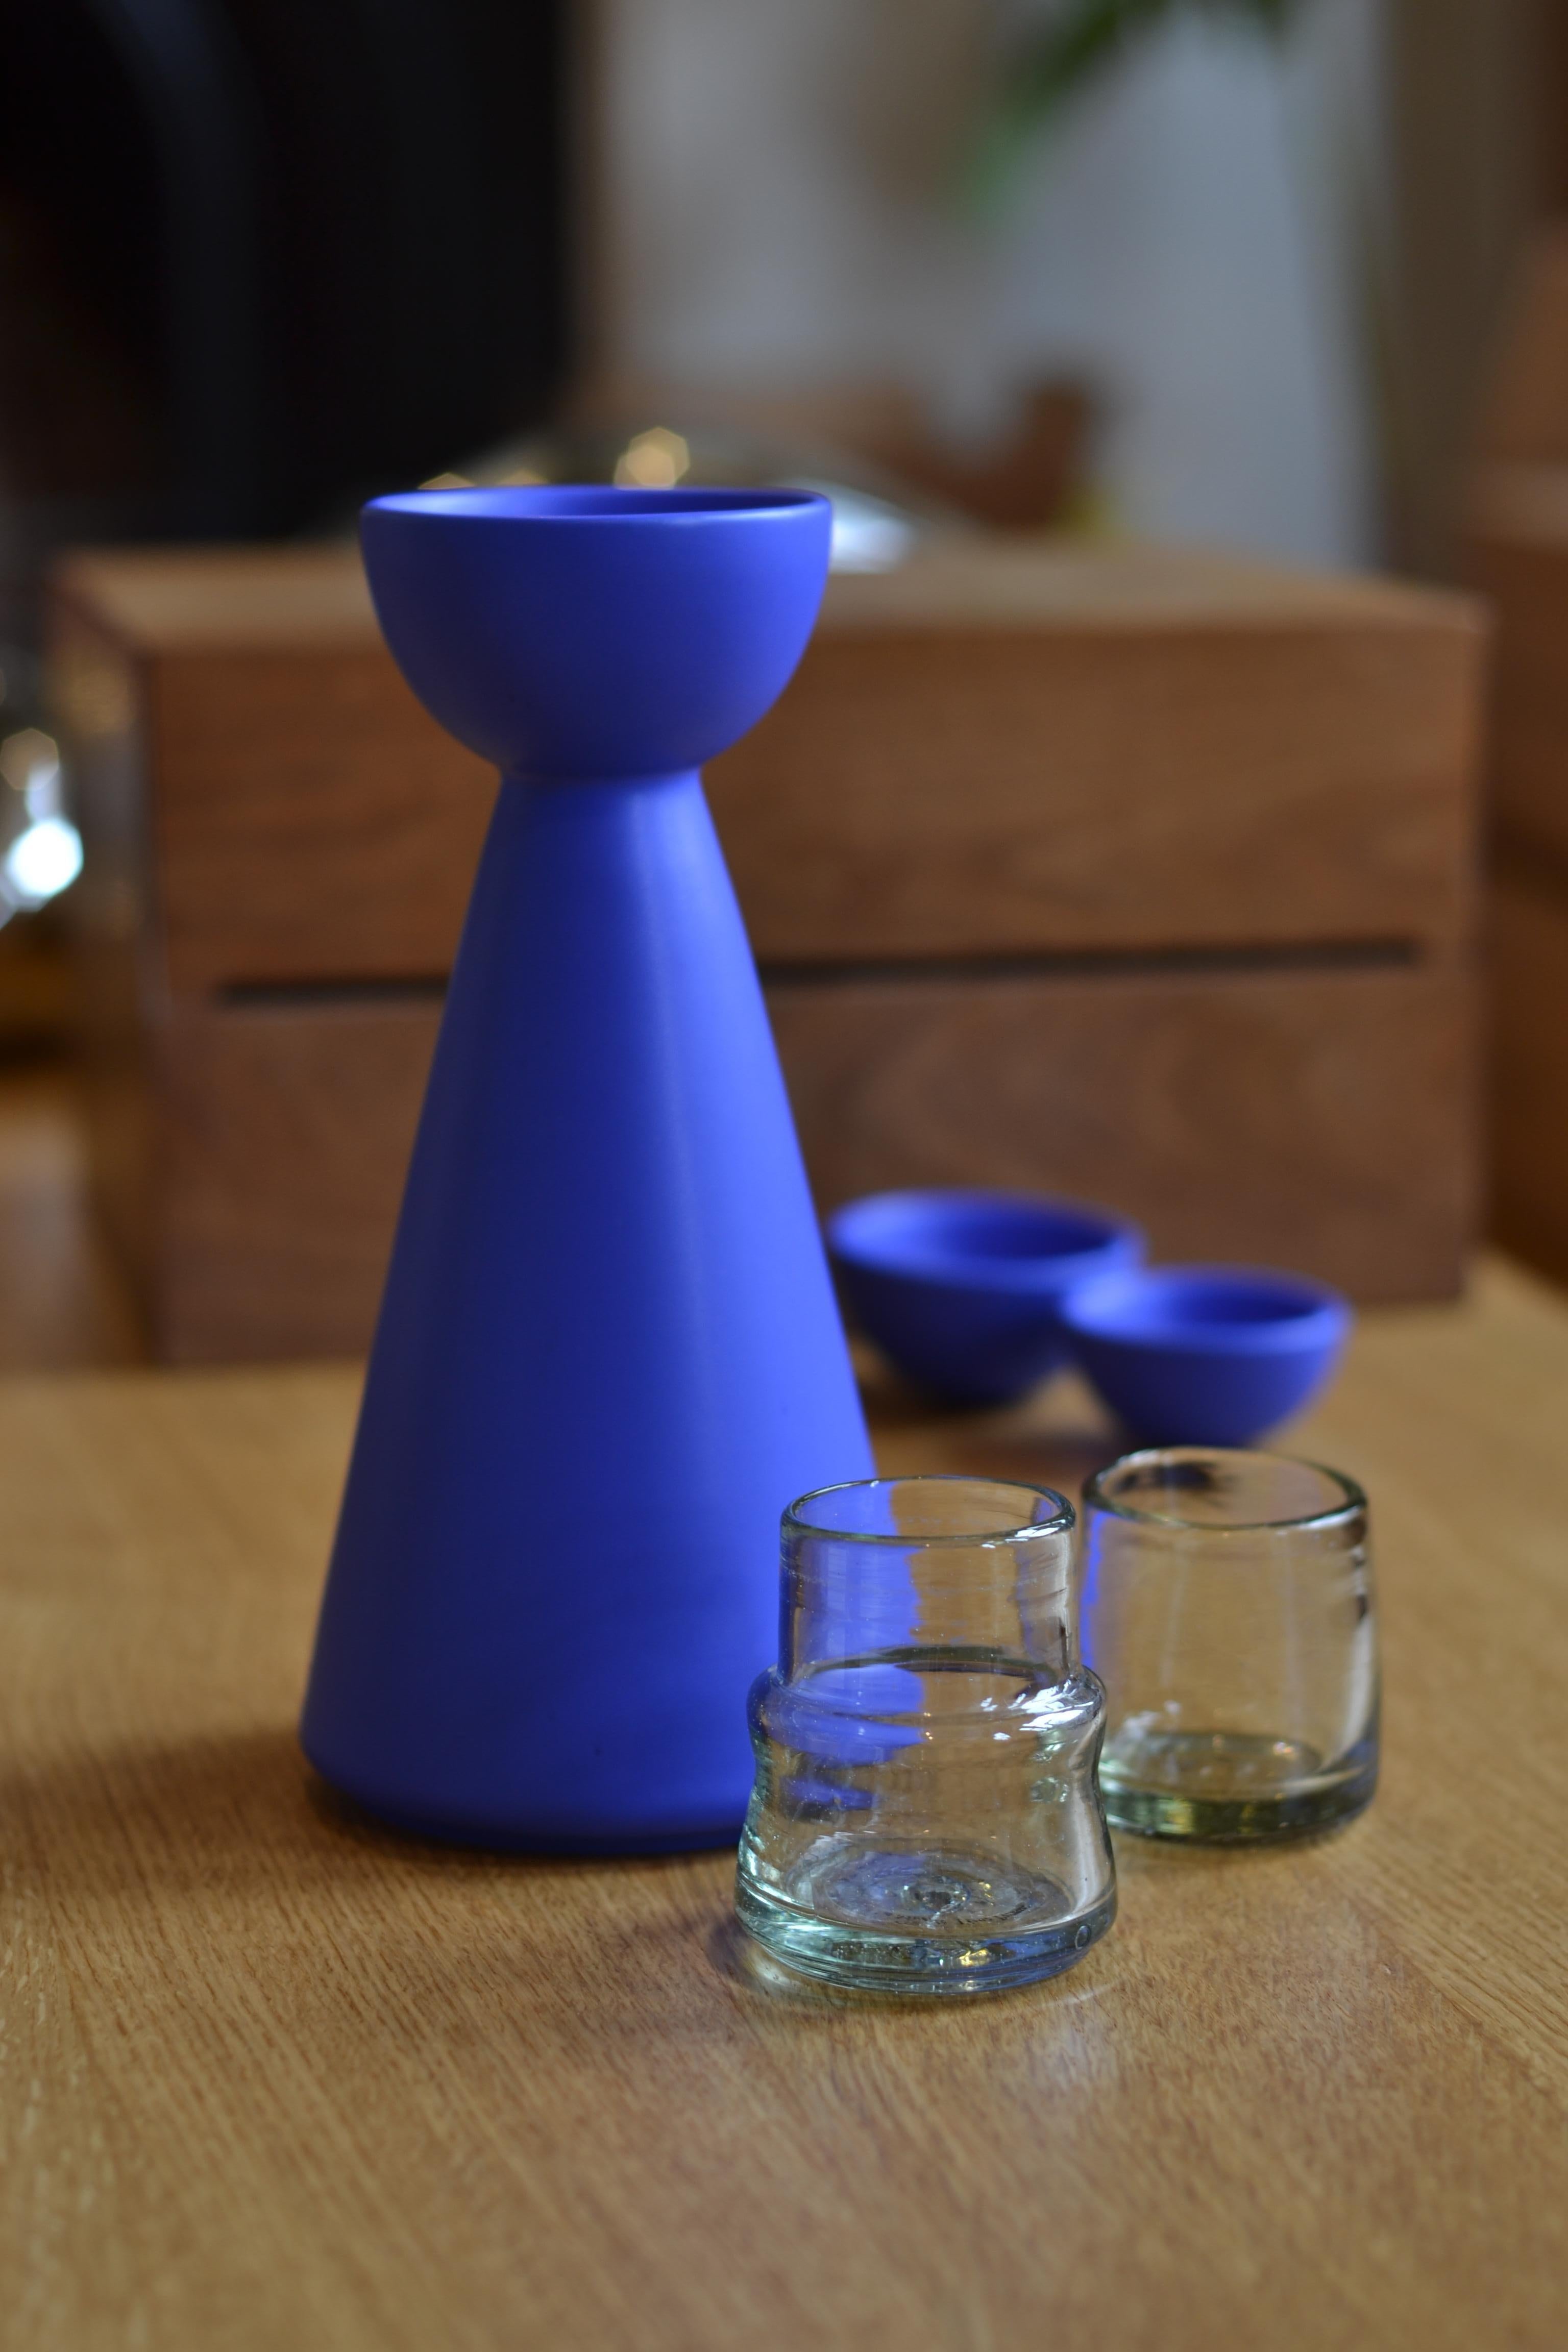 Glazed Mezcal and Tequila Bottle and two cups. Ceramic Blue and white Tequila bottle. For Sale